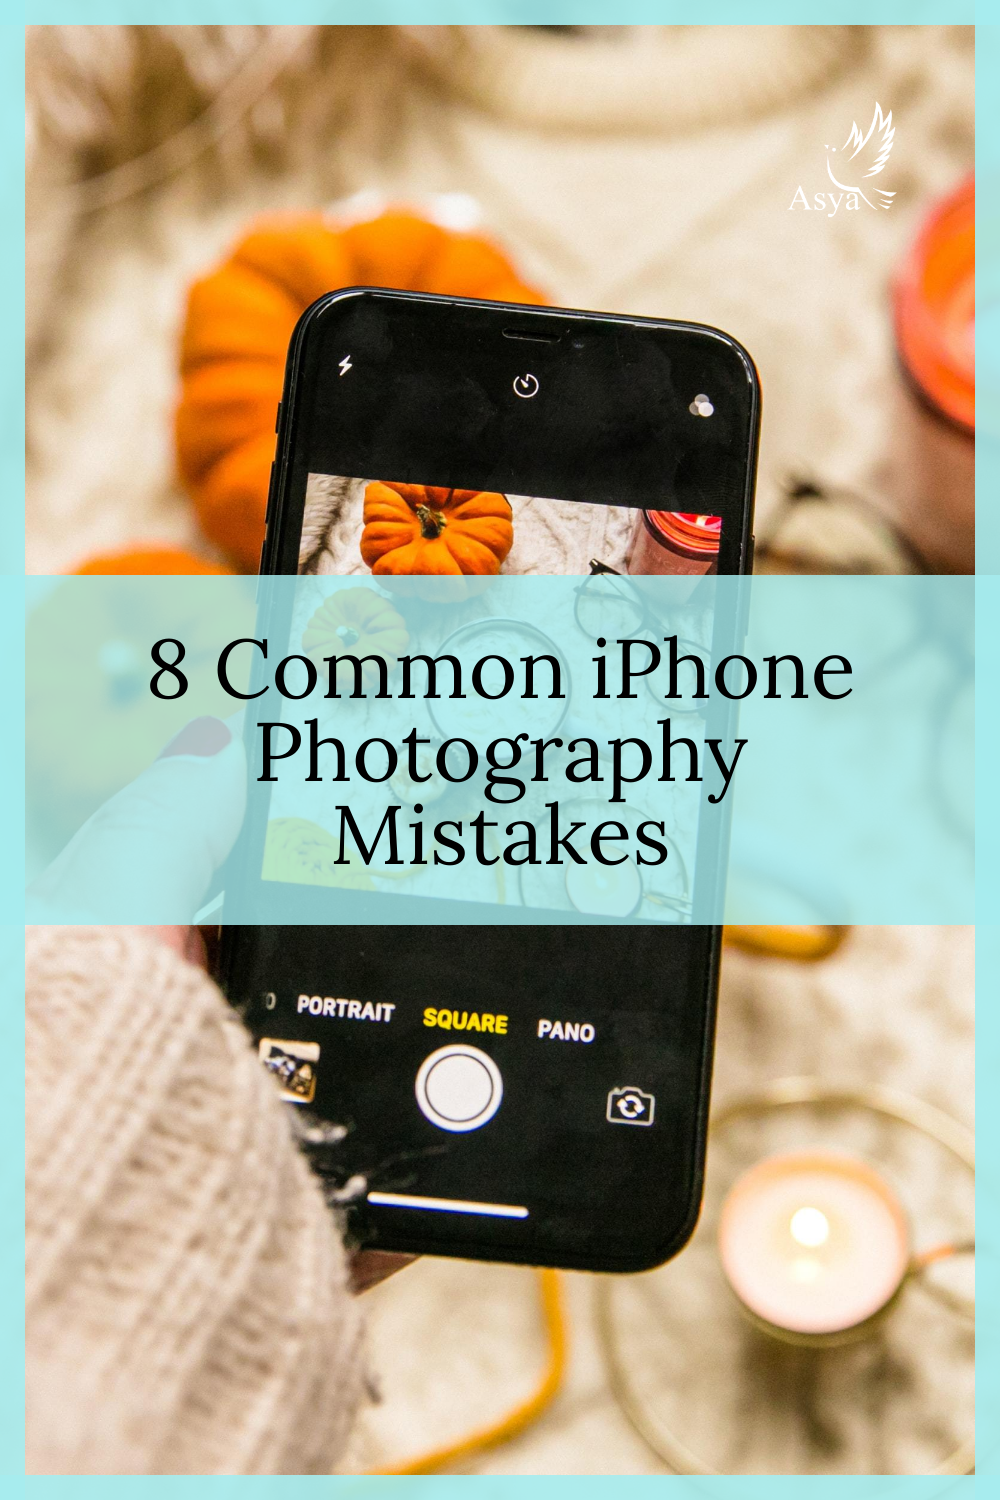 8 Common iPhone Photography Mistakes by Asya.jpg